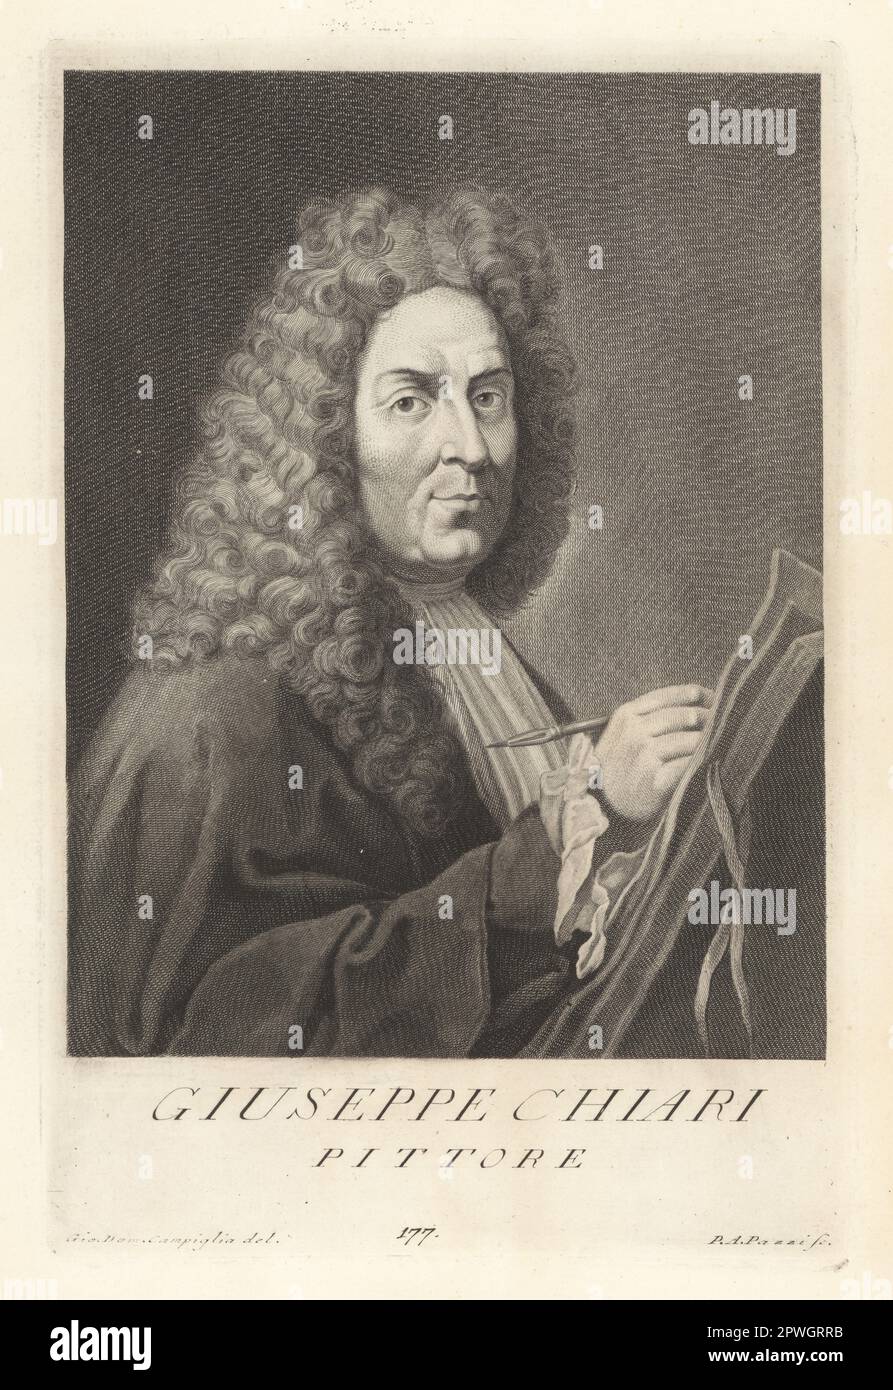 Giuseppe Bartolomeo Chiari, Italian painter of the late-Baroque period, 1654-1727. Active mostly in Rome. In powdered wig with paint brush and canvas. Giuseppe Chiari, Pittore. Copperplate engraving by Pietro Antonio Pazzi after Giovanni Domenico Campiglia after a self portrait by the artist from Francesco Moucke's Museo Florentino (Museum Florentinum), Serie di Ritratti de Pittori (Series of Portraits of Painters) stamperia Mouckiana, Florence, 1752-62. Stock Photo